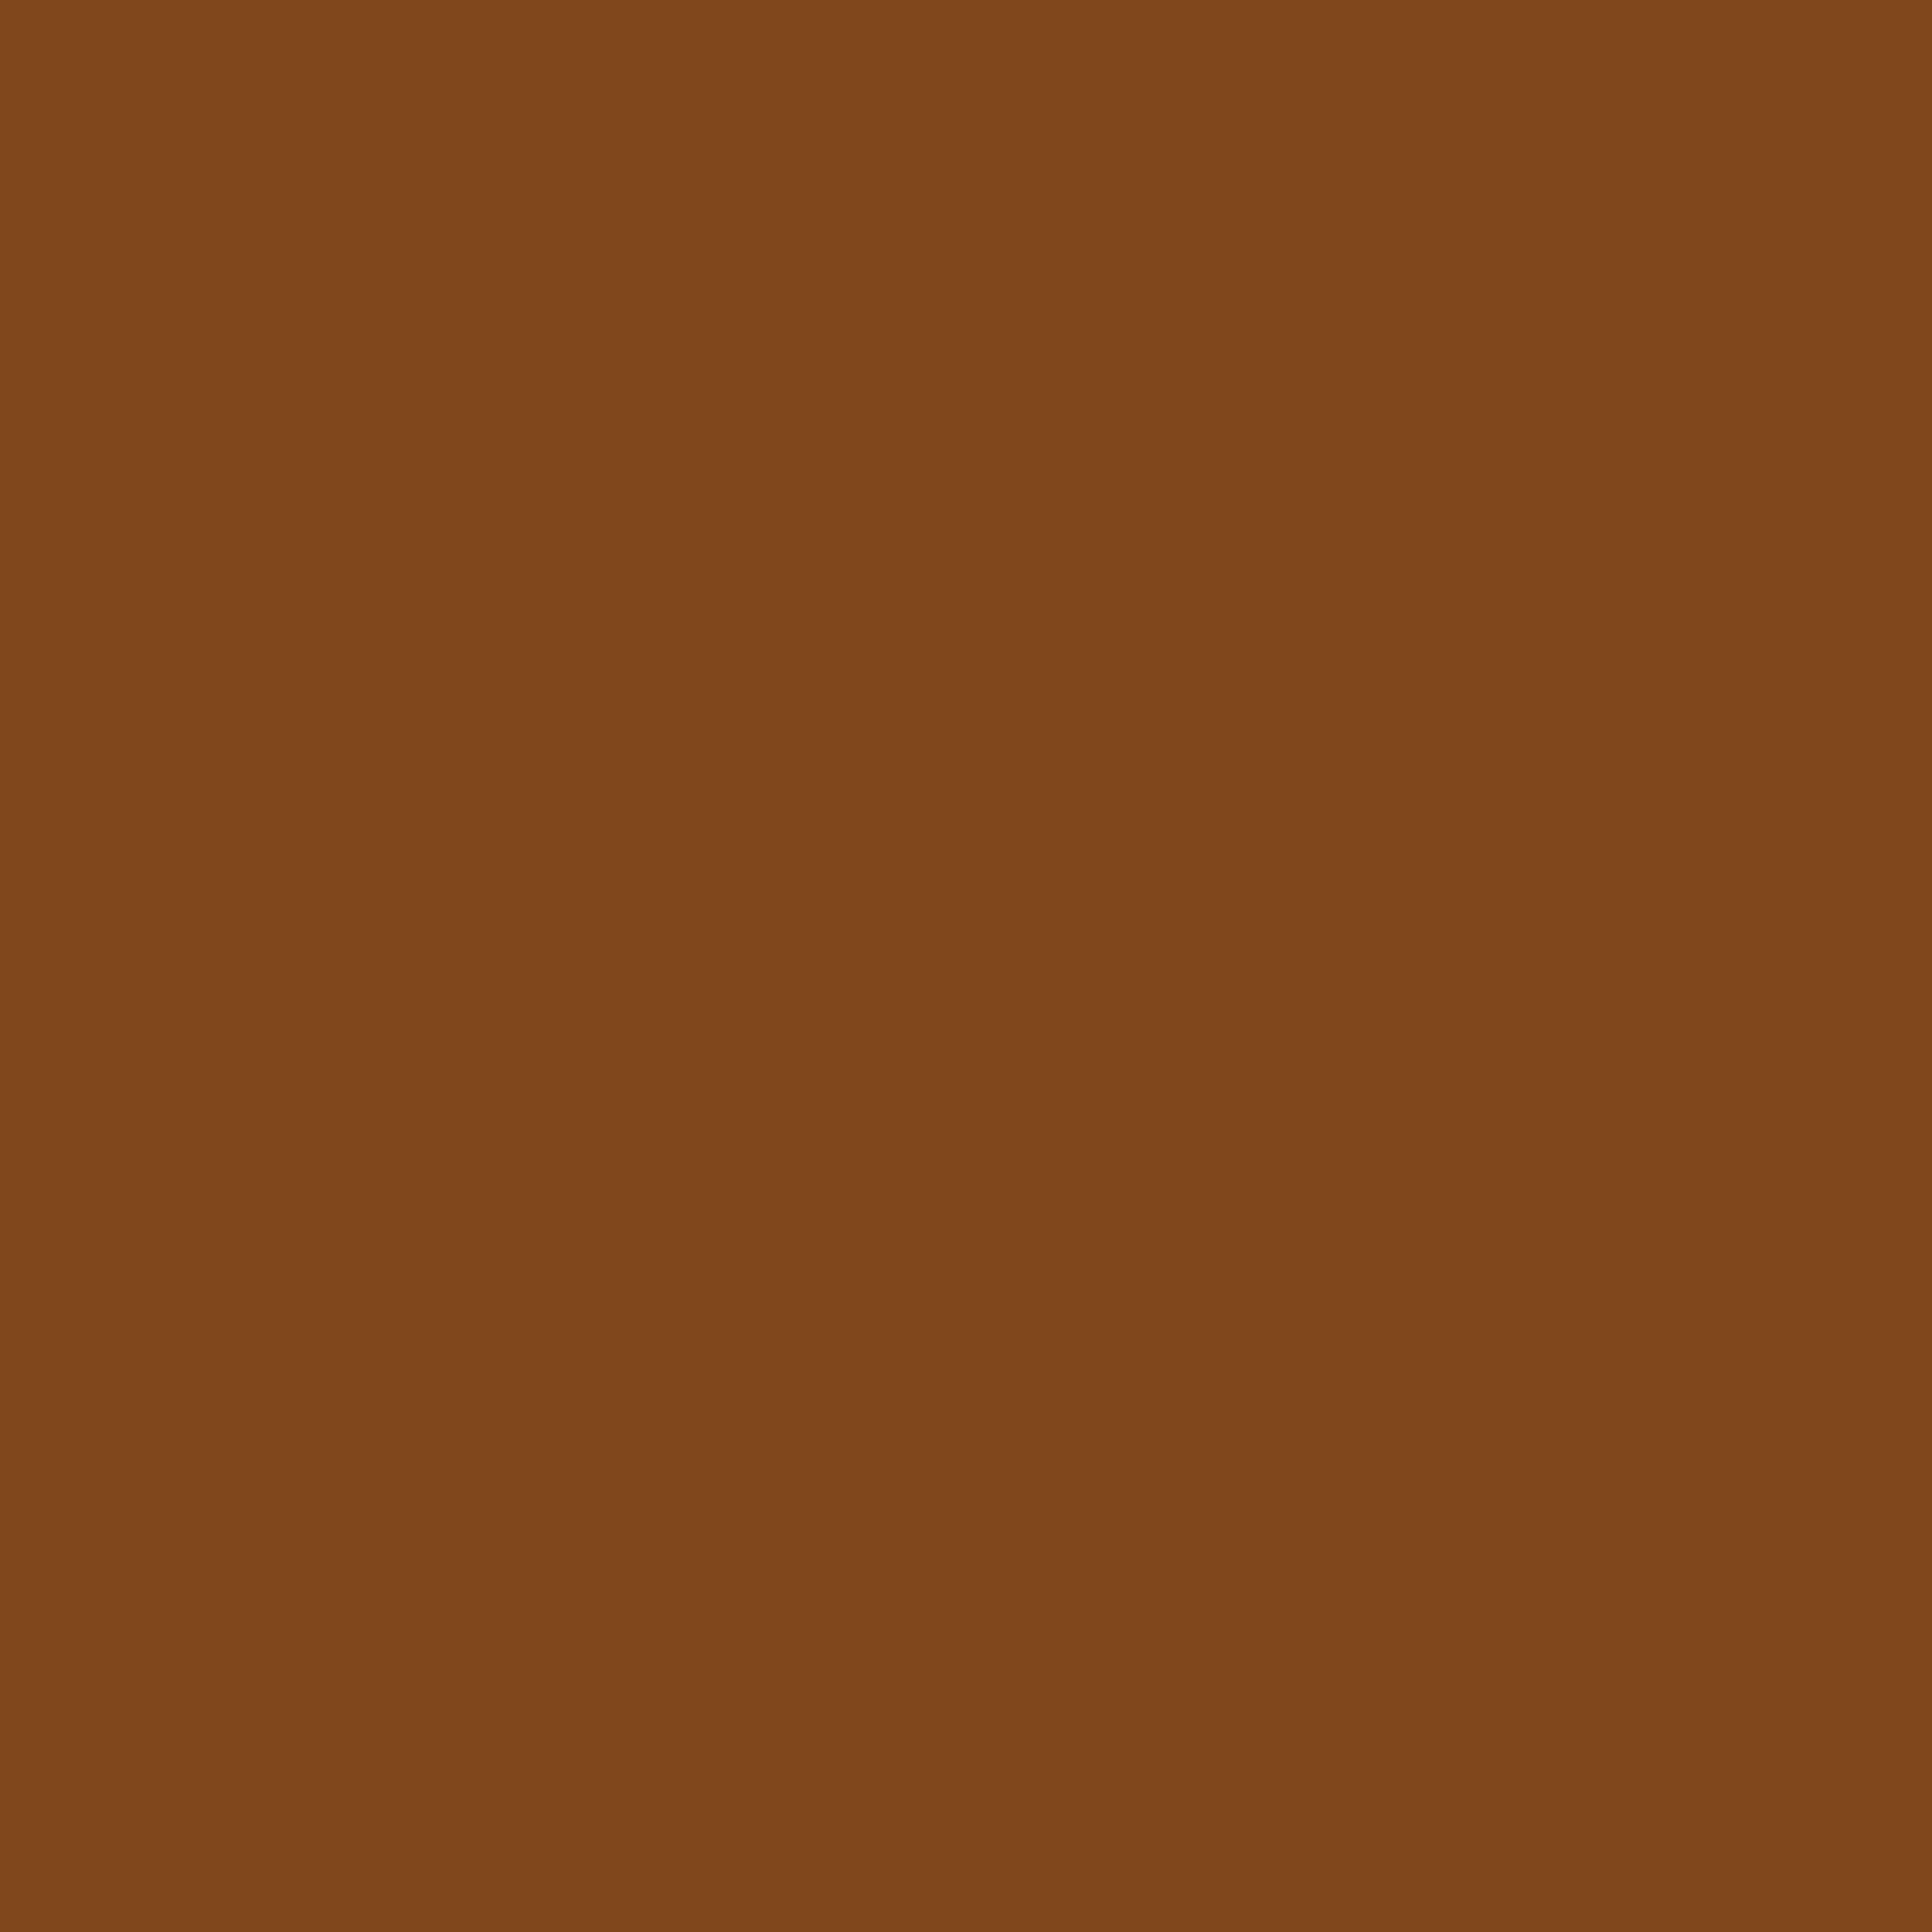 2732x2732 Russet Solid Color Background